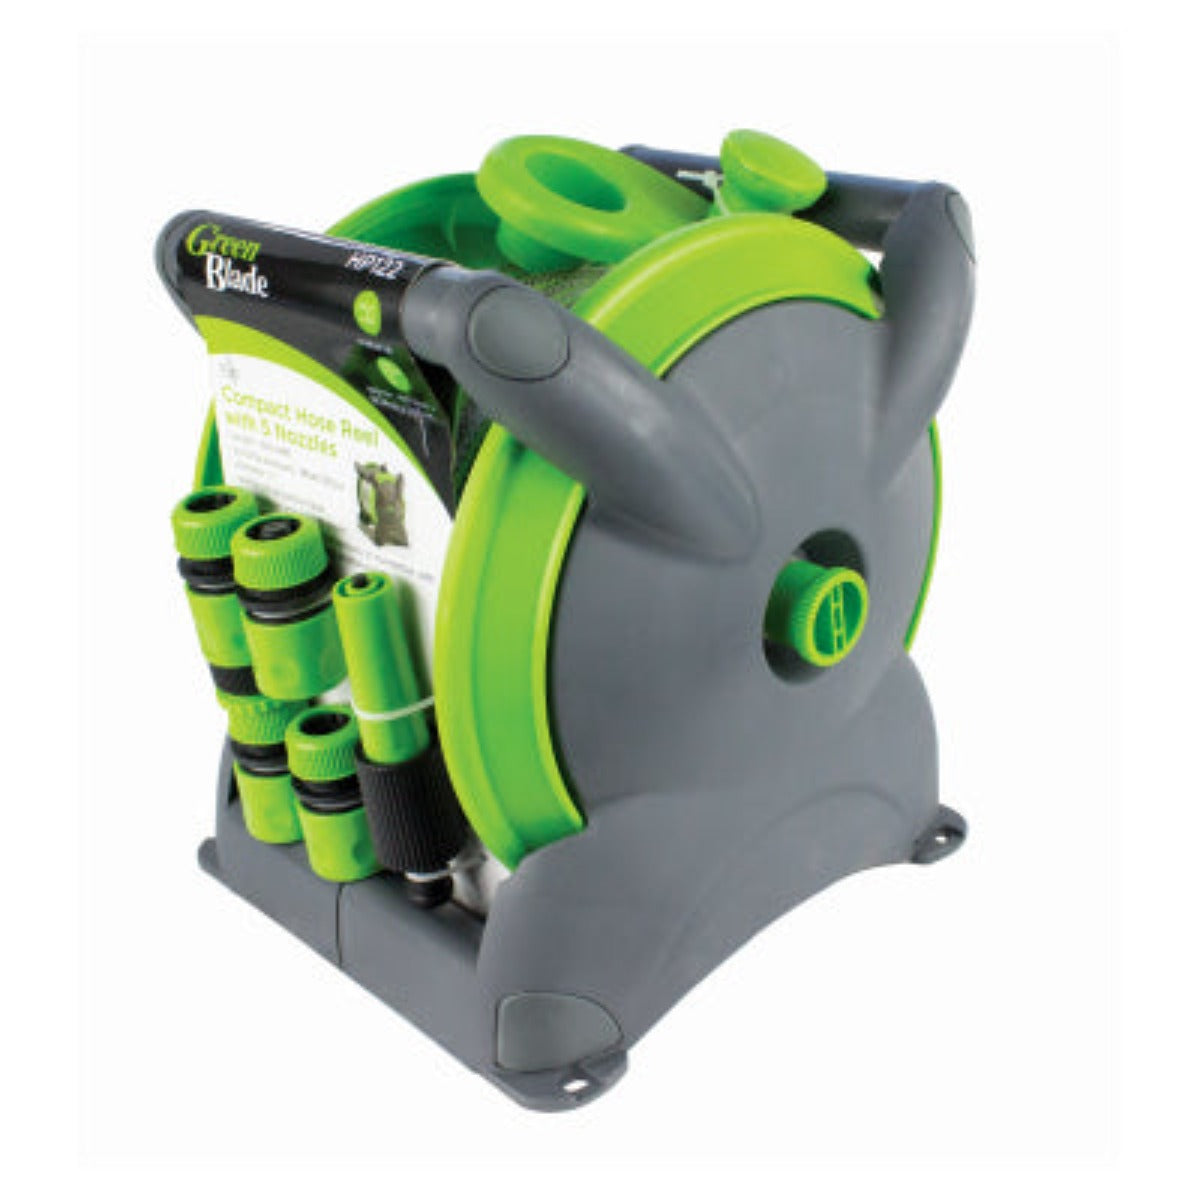 GREENBLADE 15m Compact Hose Reel With 5 Nozzles